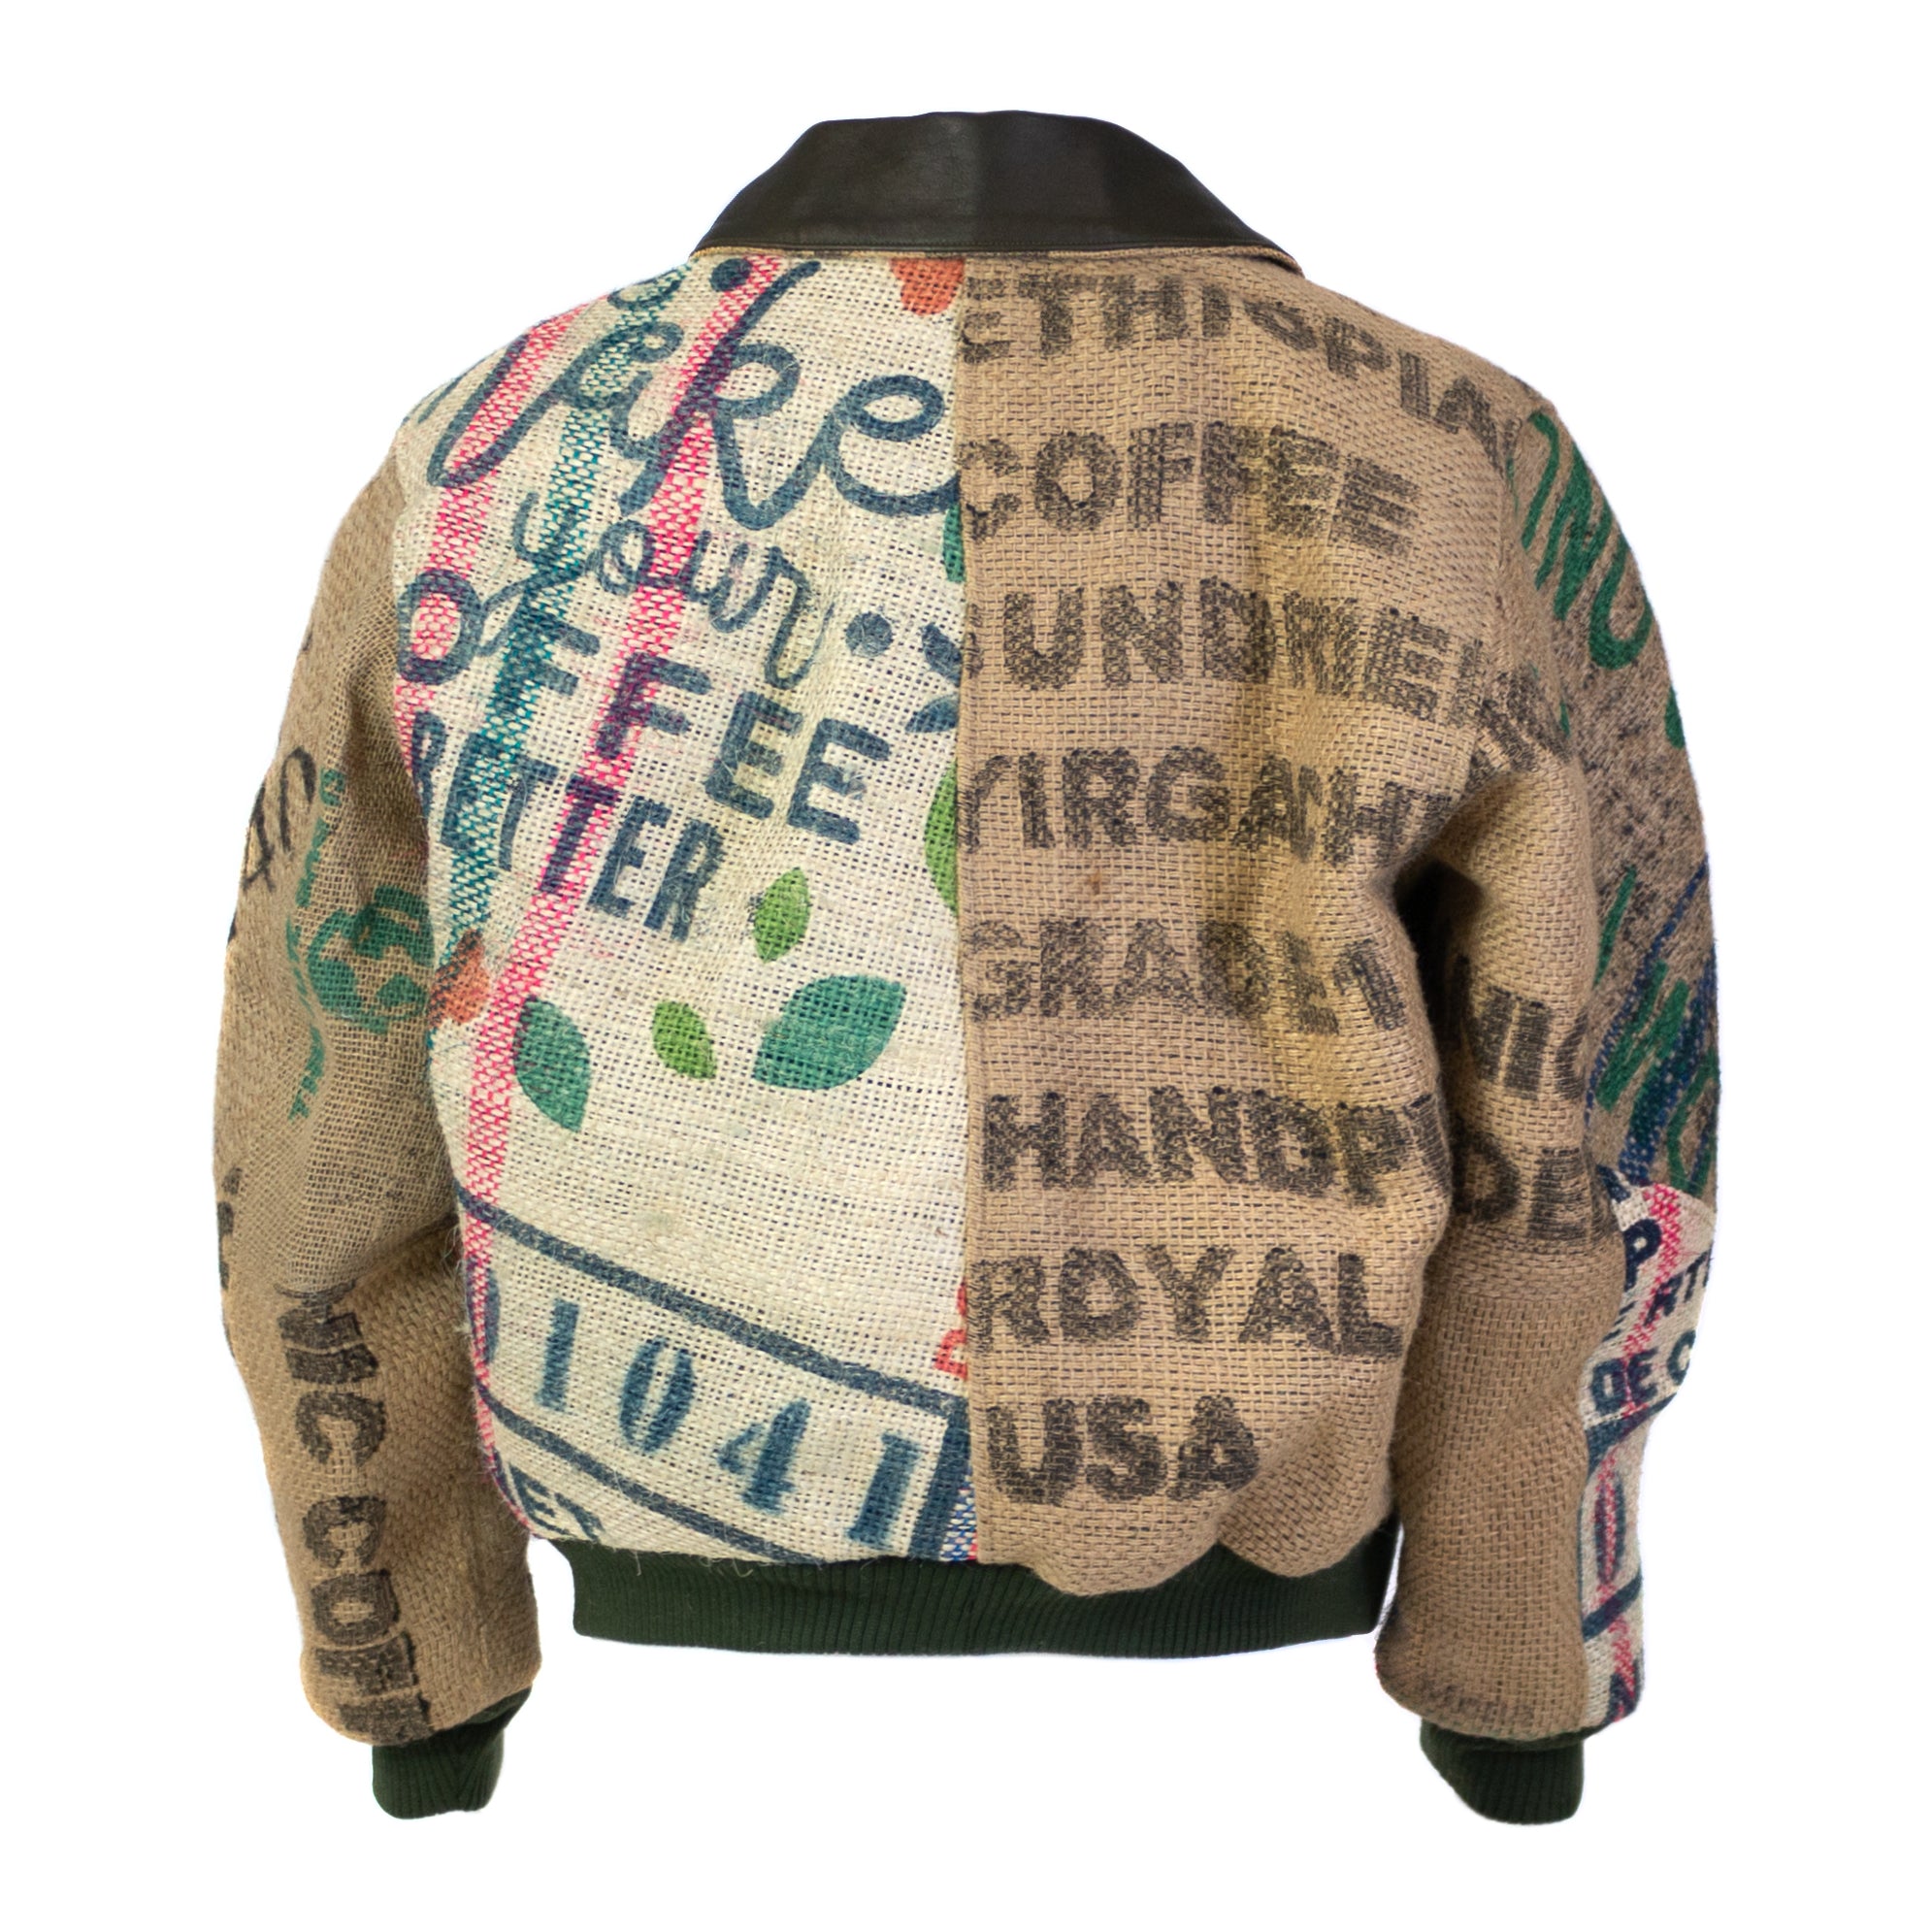 Made to Order - Burlap Bomber